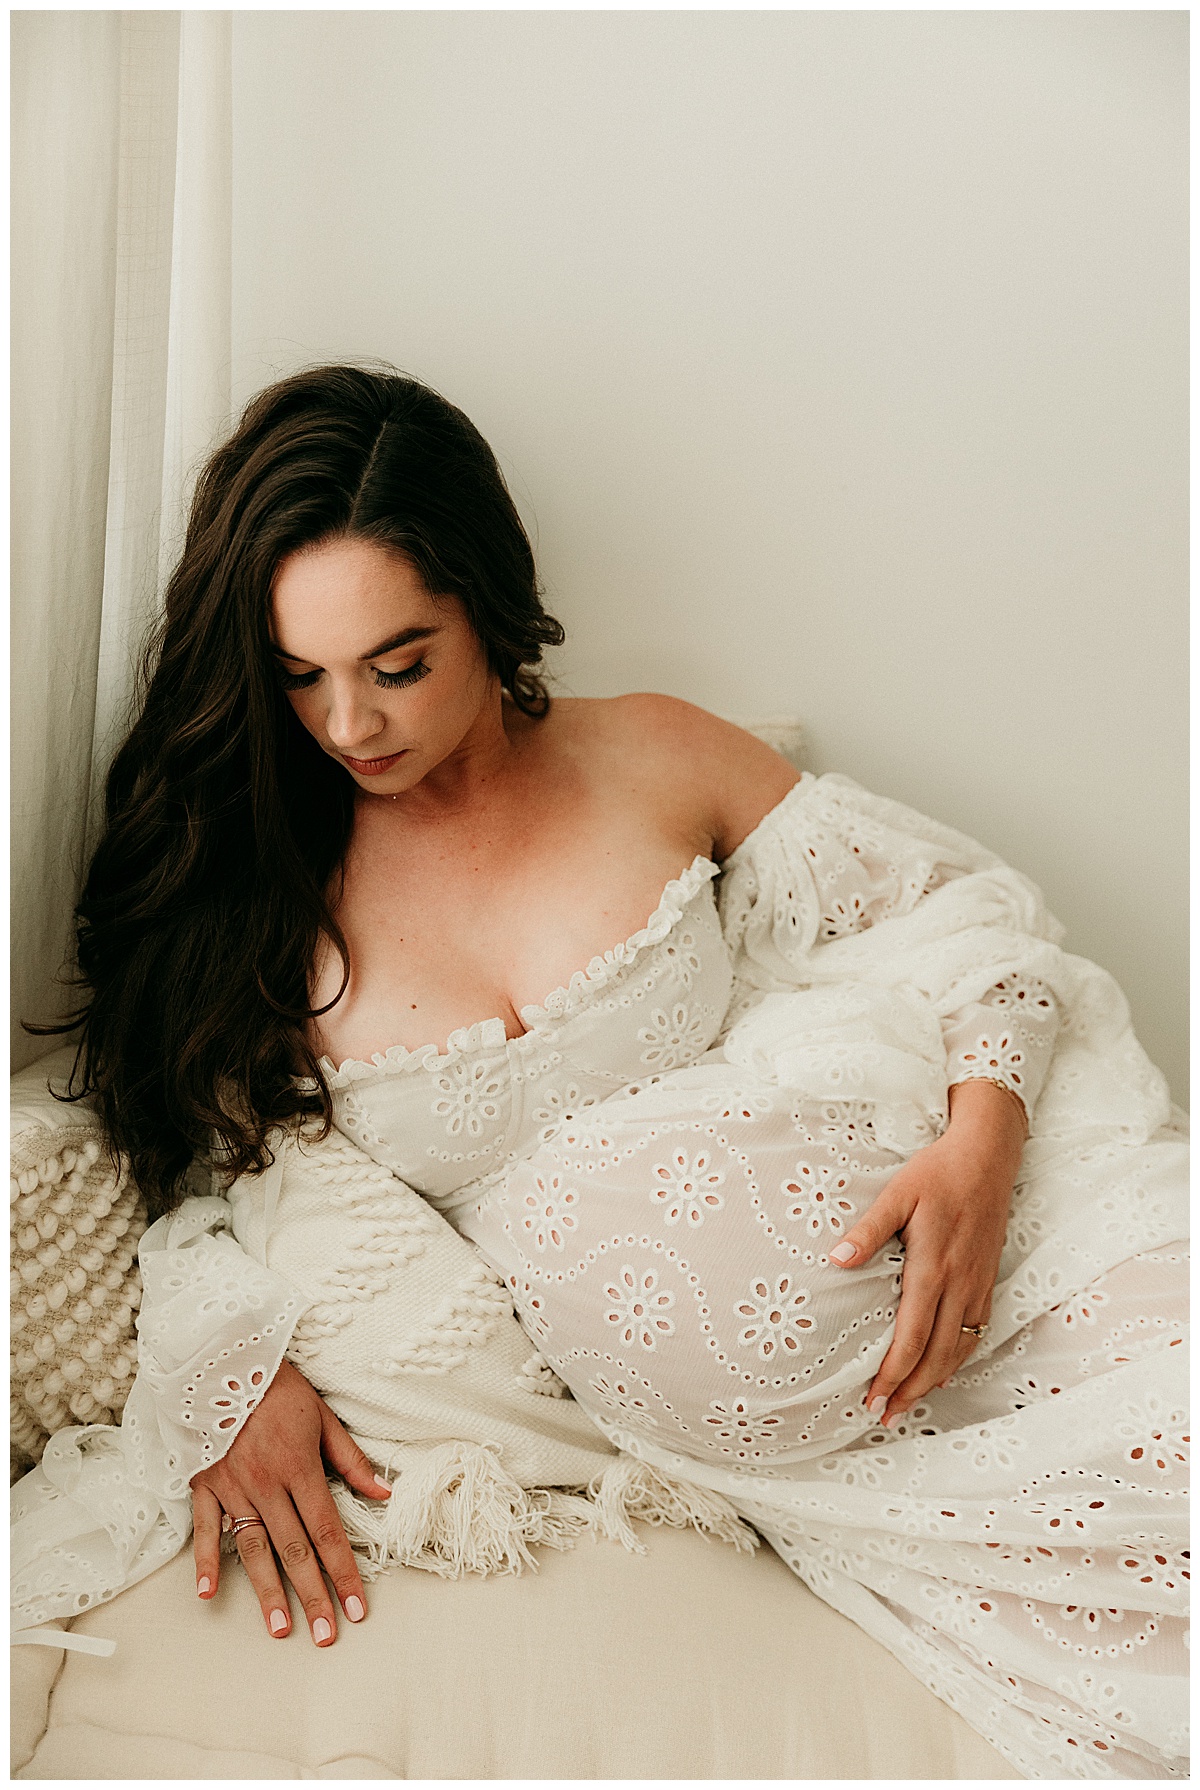 Mother has beautiful Hair & Makeup done for full fine art maternity session